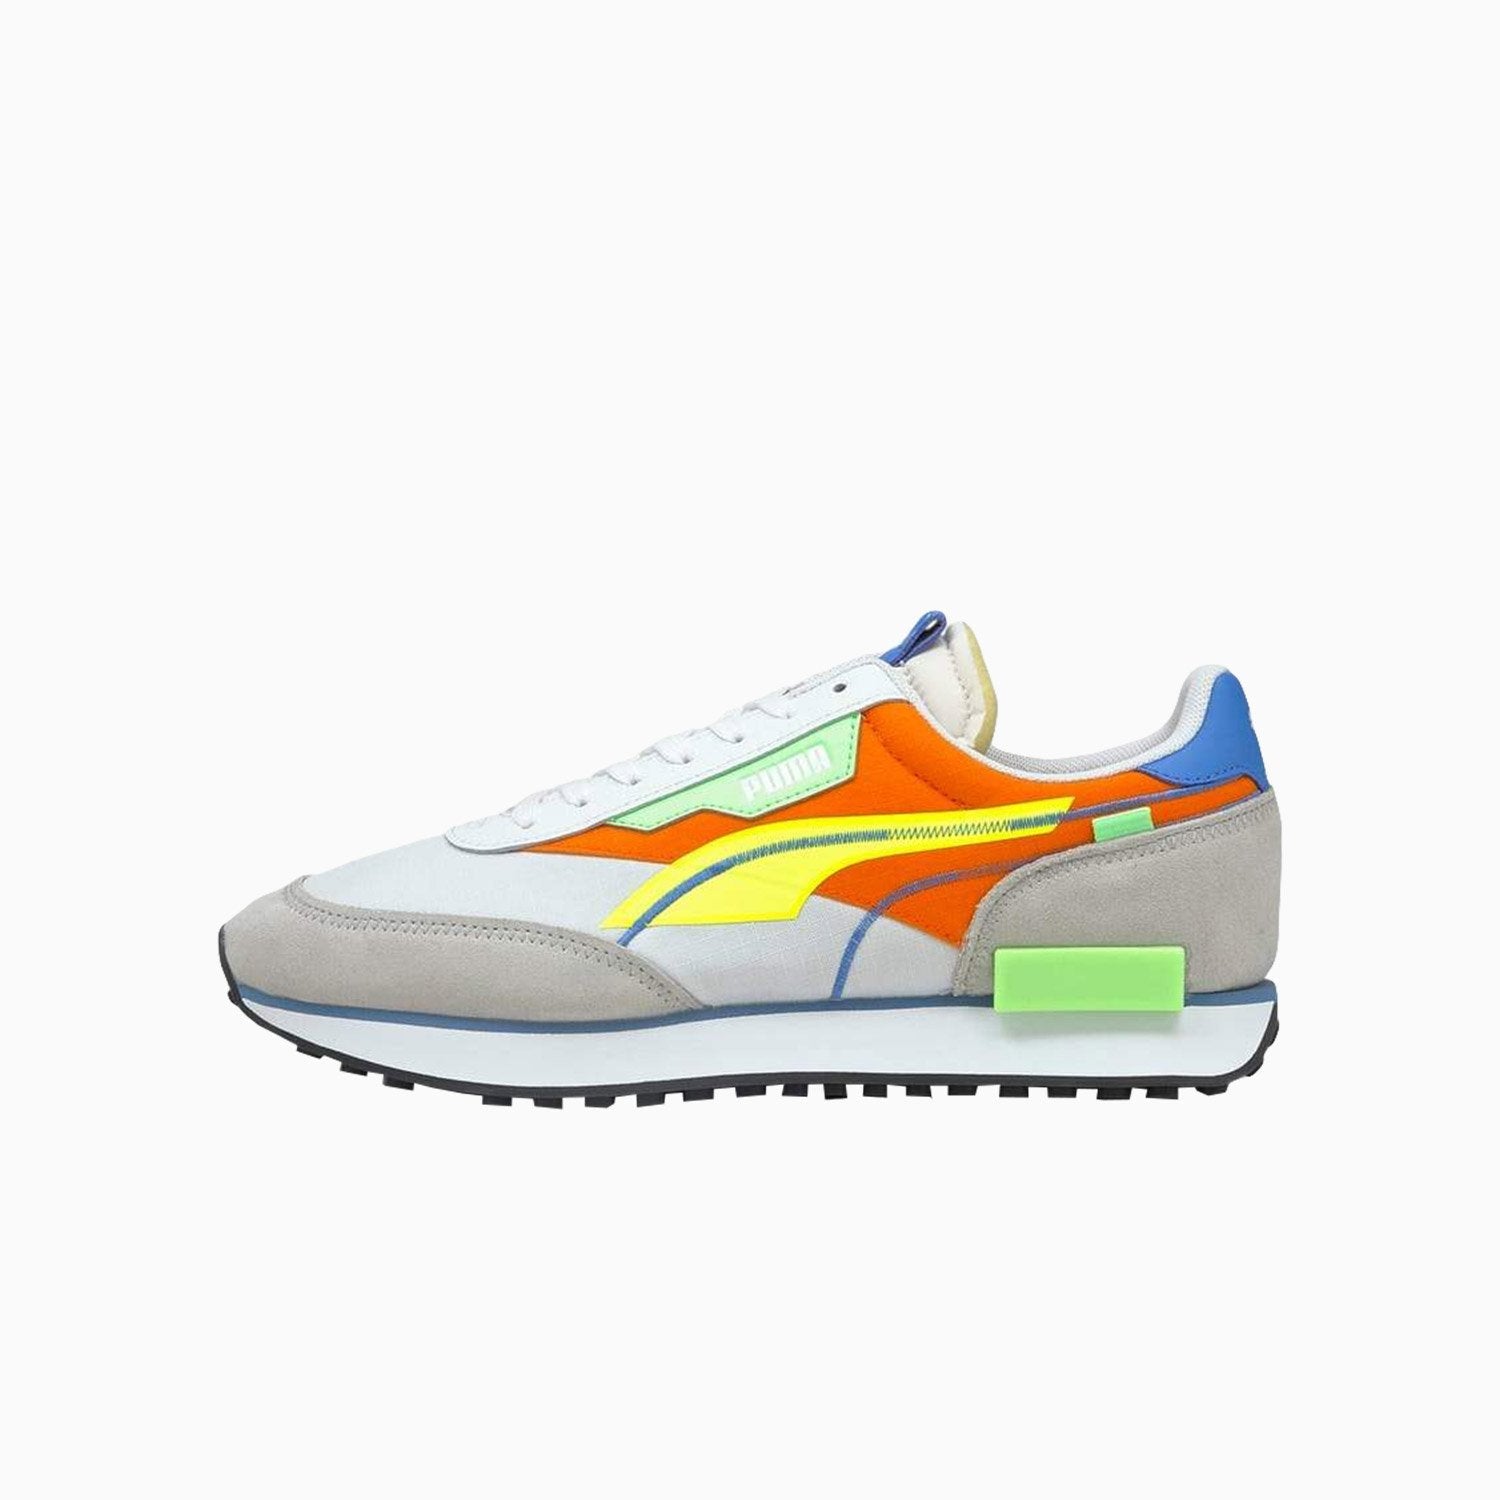 Puma | Men's Future Rider Twofold SD Pop - Color: BLUE BLACK WHITE YELLOW, WHITE ORANGE GREY BLUE - Tops and Bottoms USA -